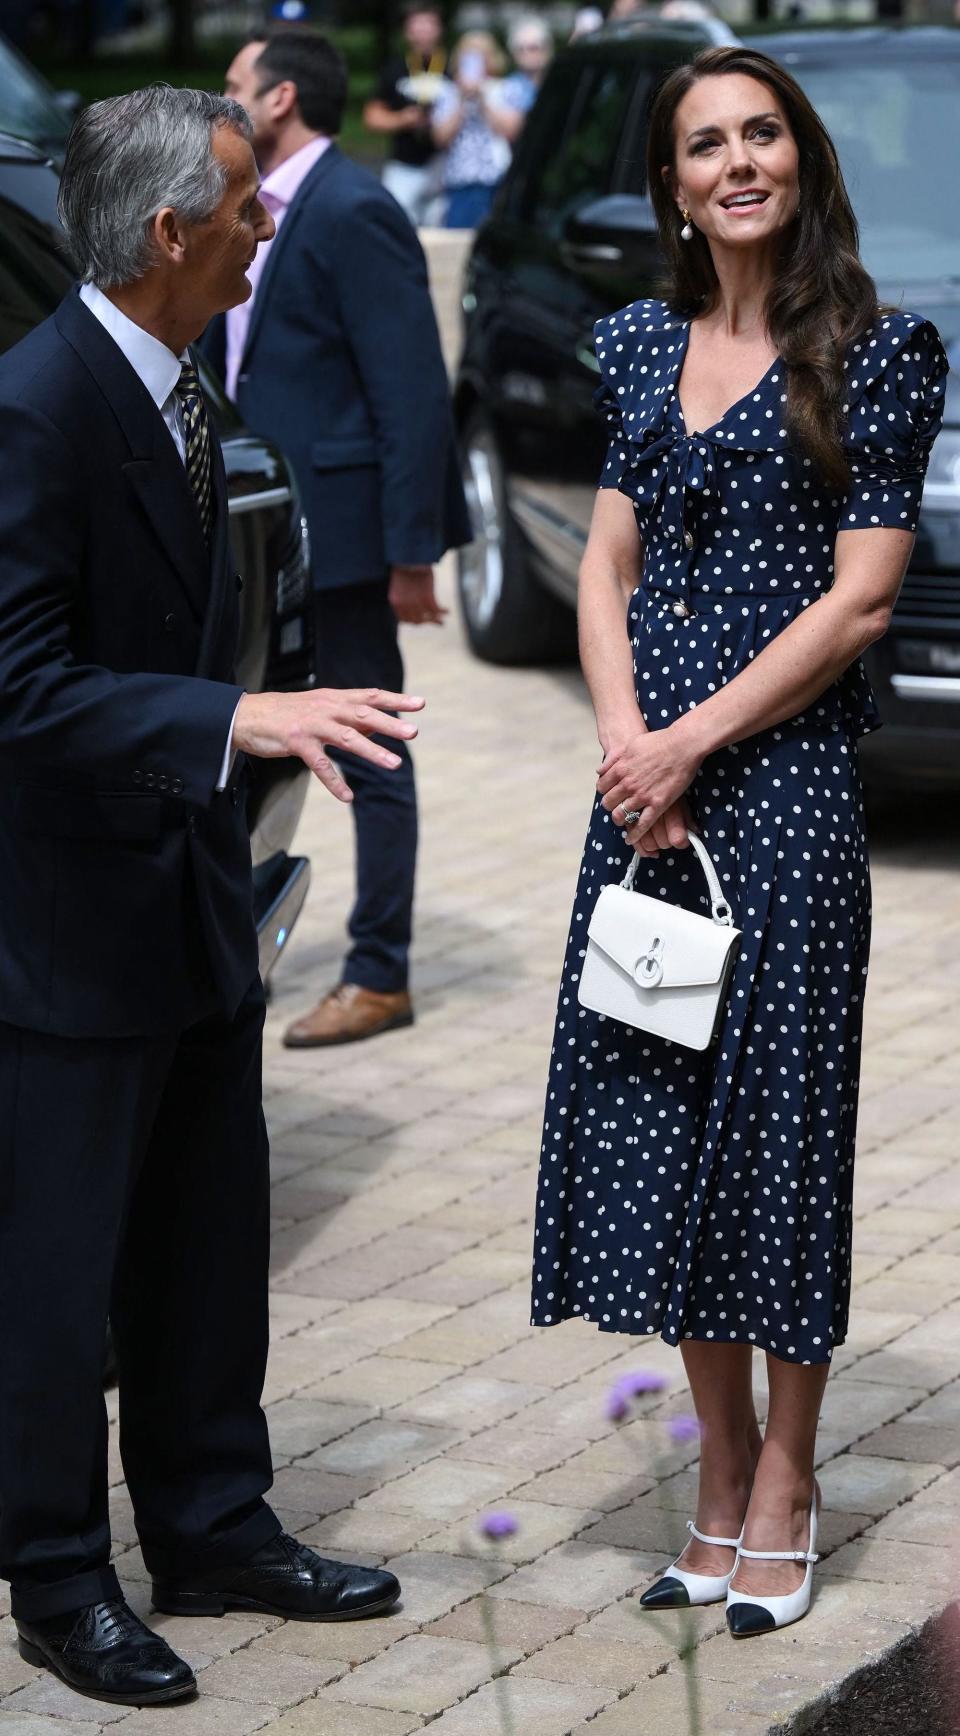 Kate Middleton attends an engagement at "Hope Street" in Southampton, England.